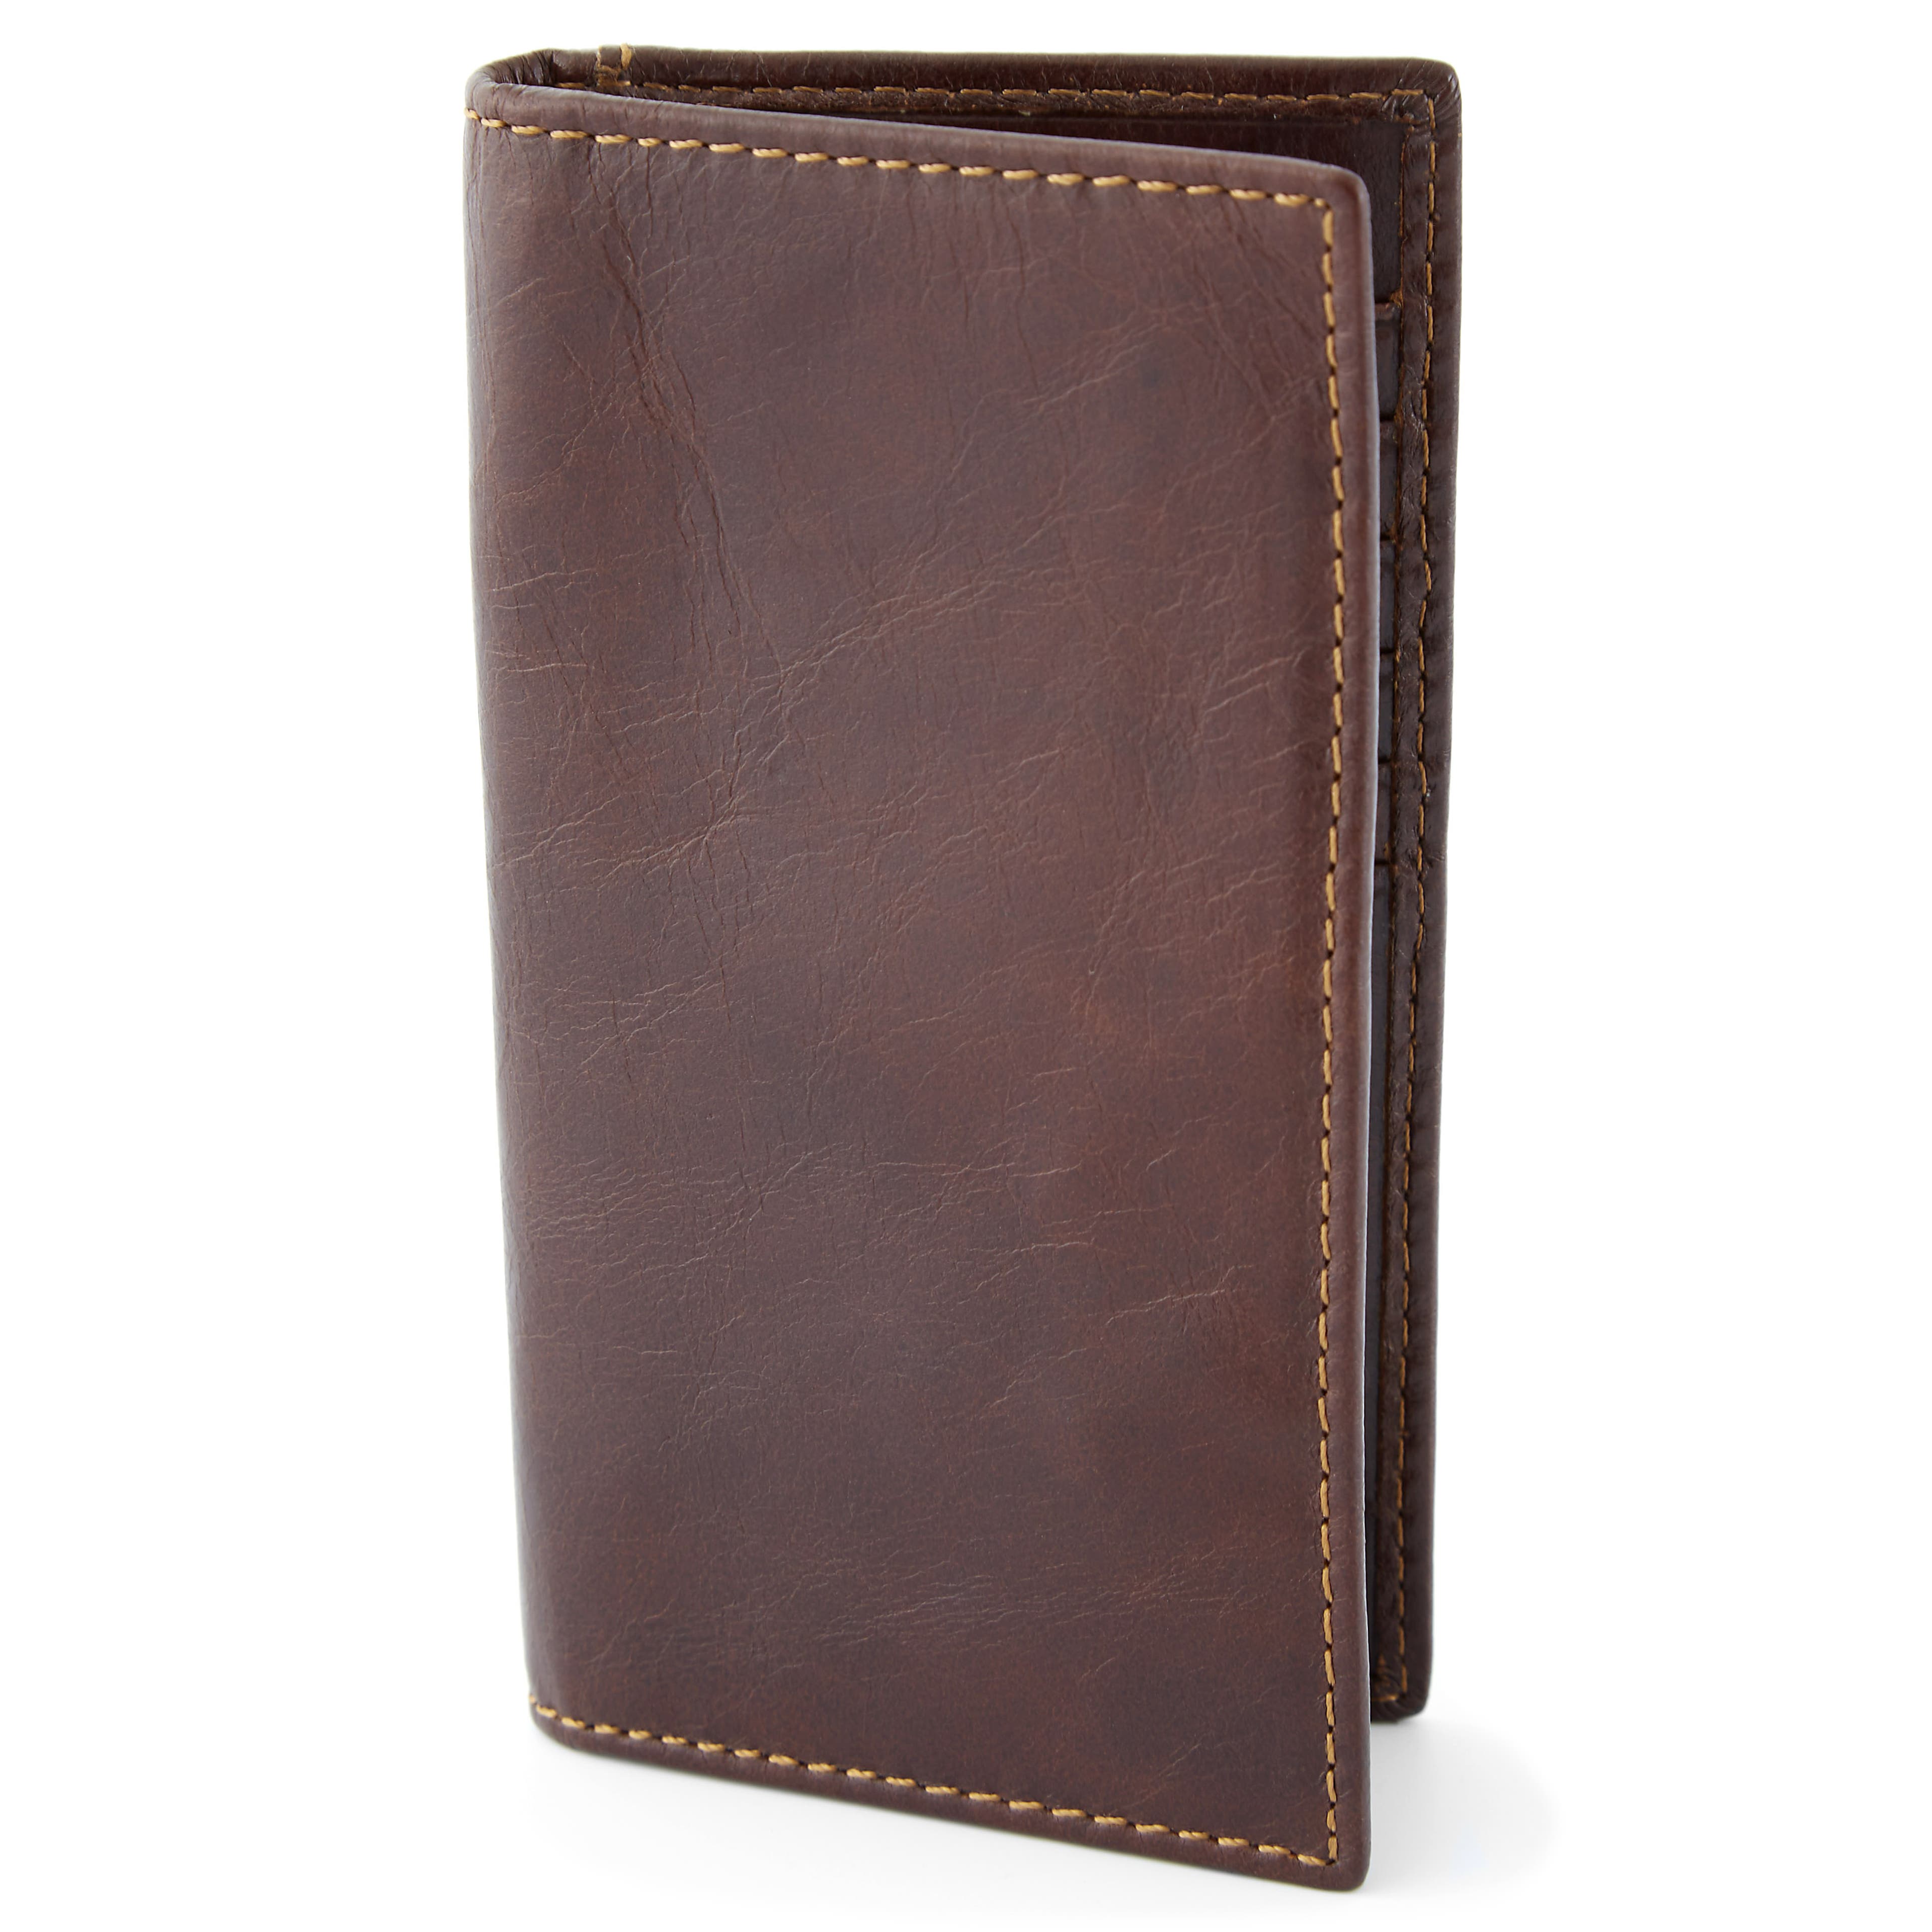 Large Coffee Brown Leather RFID Card Holder